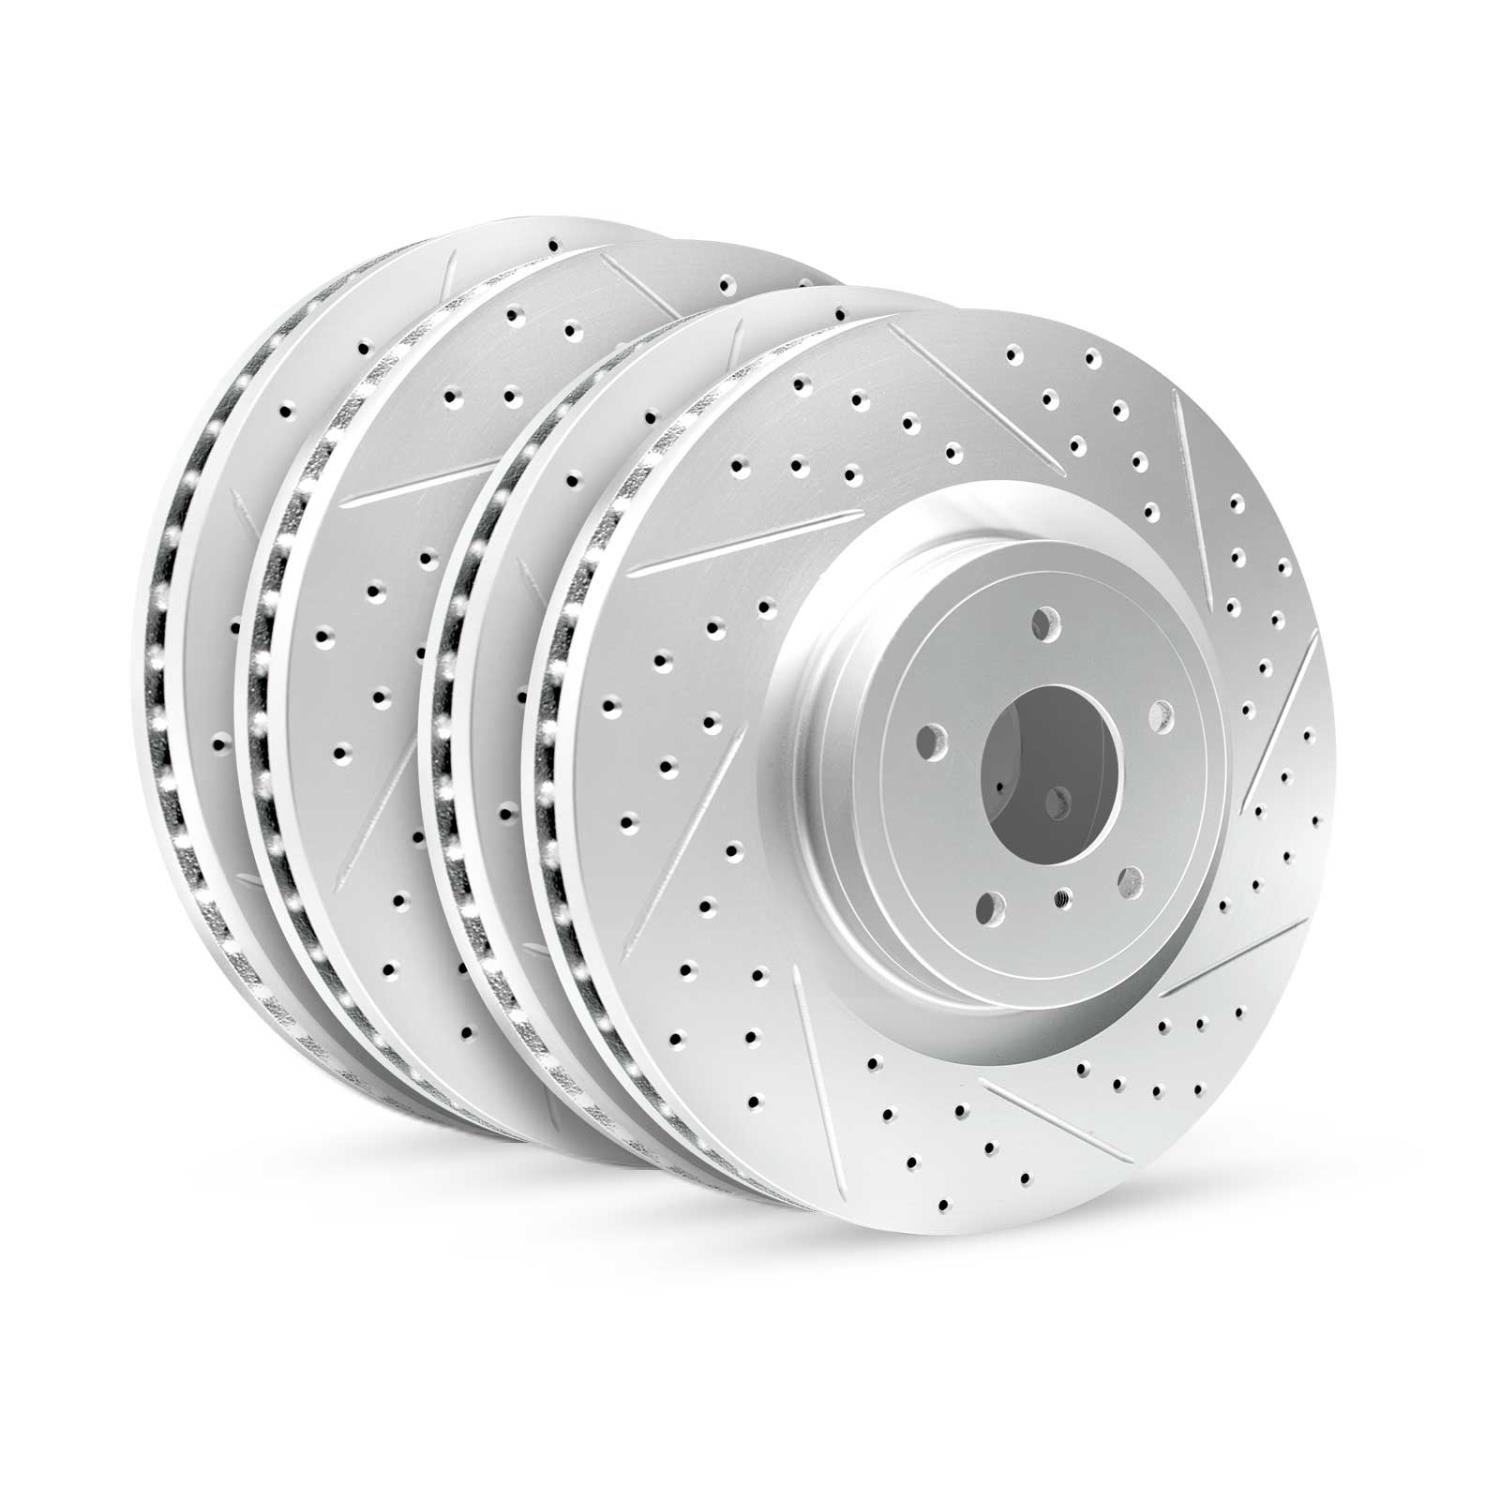 GEO-Carbon Drilled/Slotted Rotors, 2017-2020 Kia/Hyundai/Genesis, Position: Front/Rear